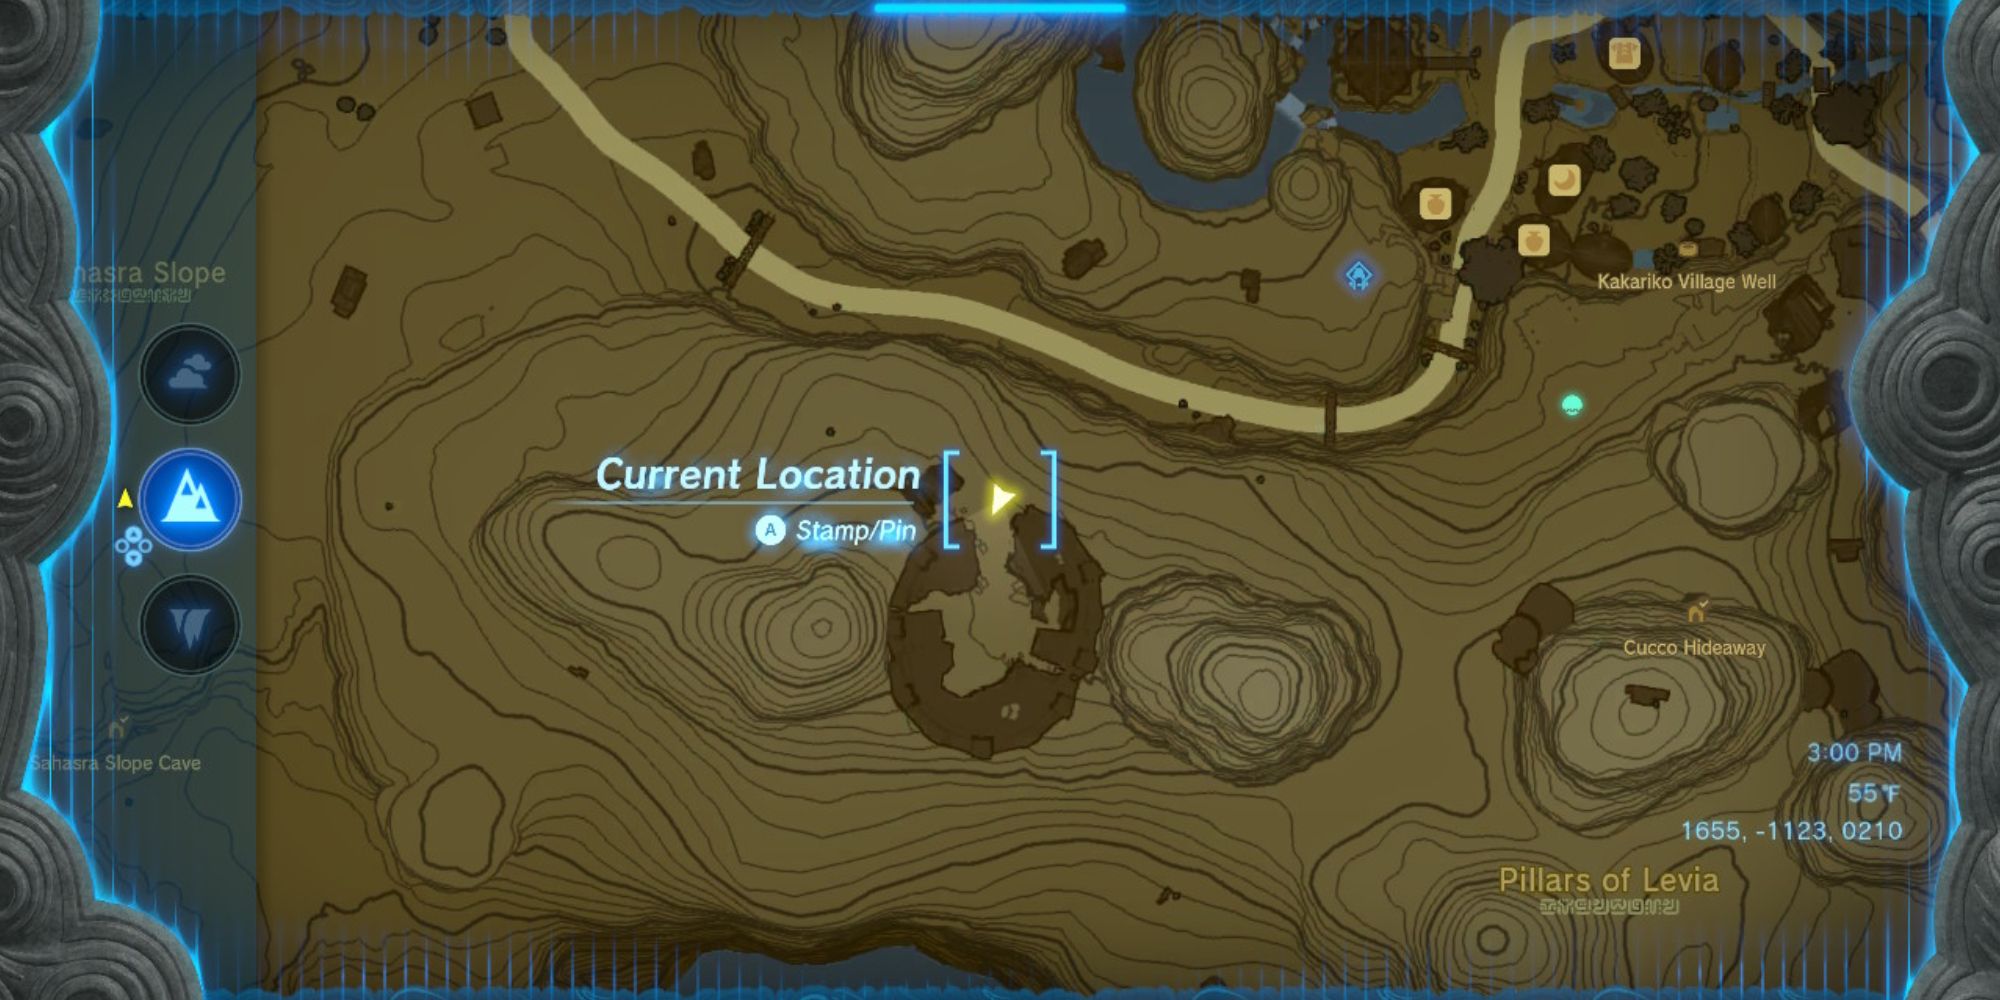 A close-up of the Nestled Ring ruins on the map in Tears of the Kingdom.